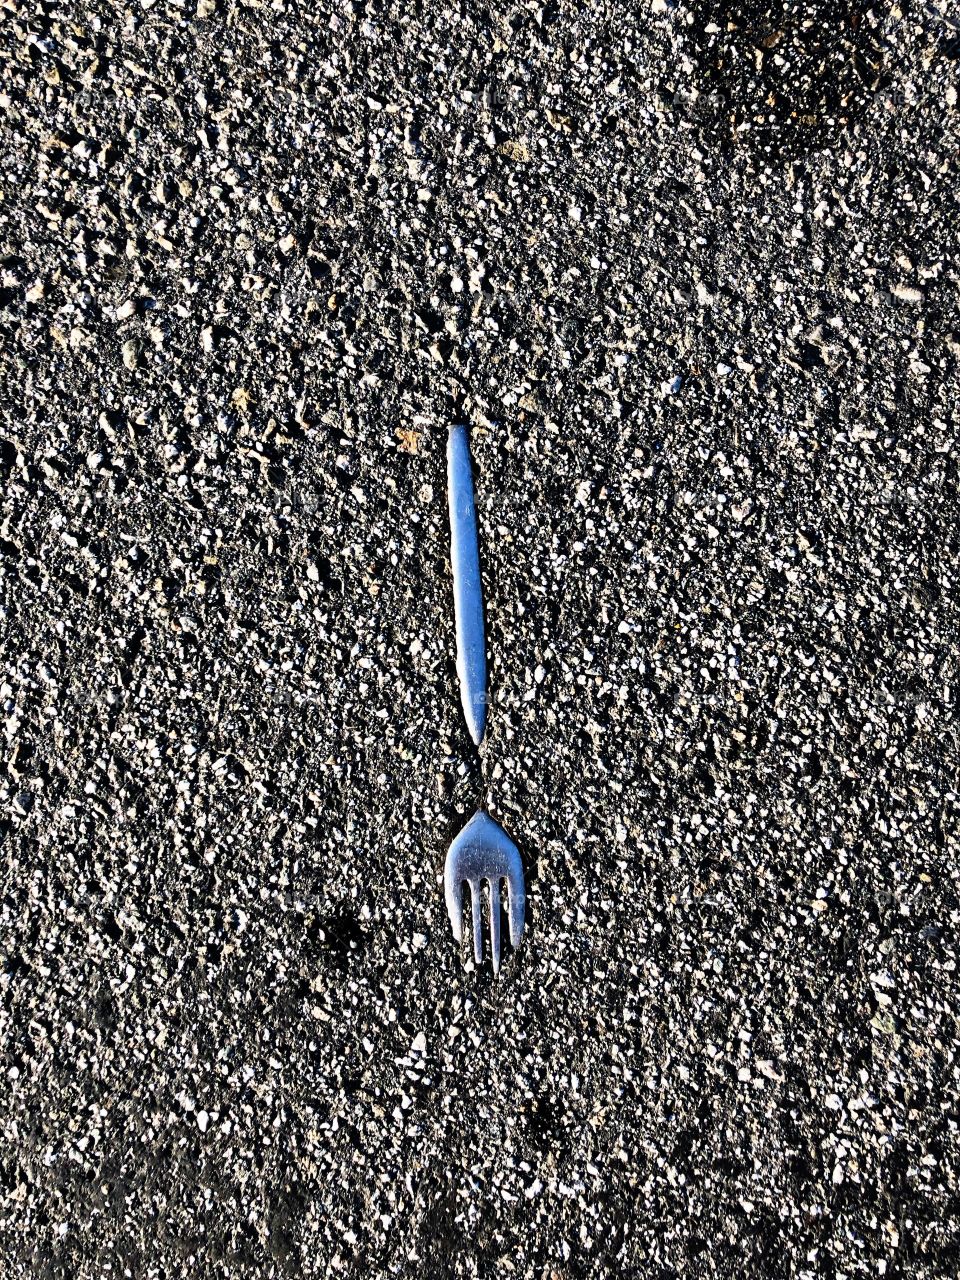 Fork in the road 